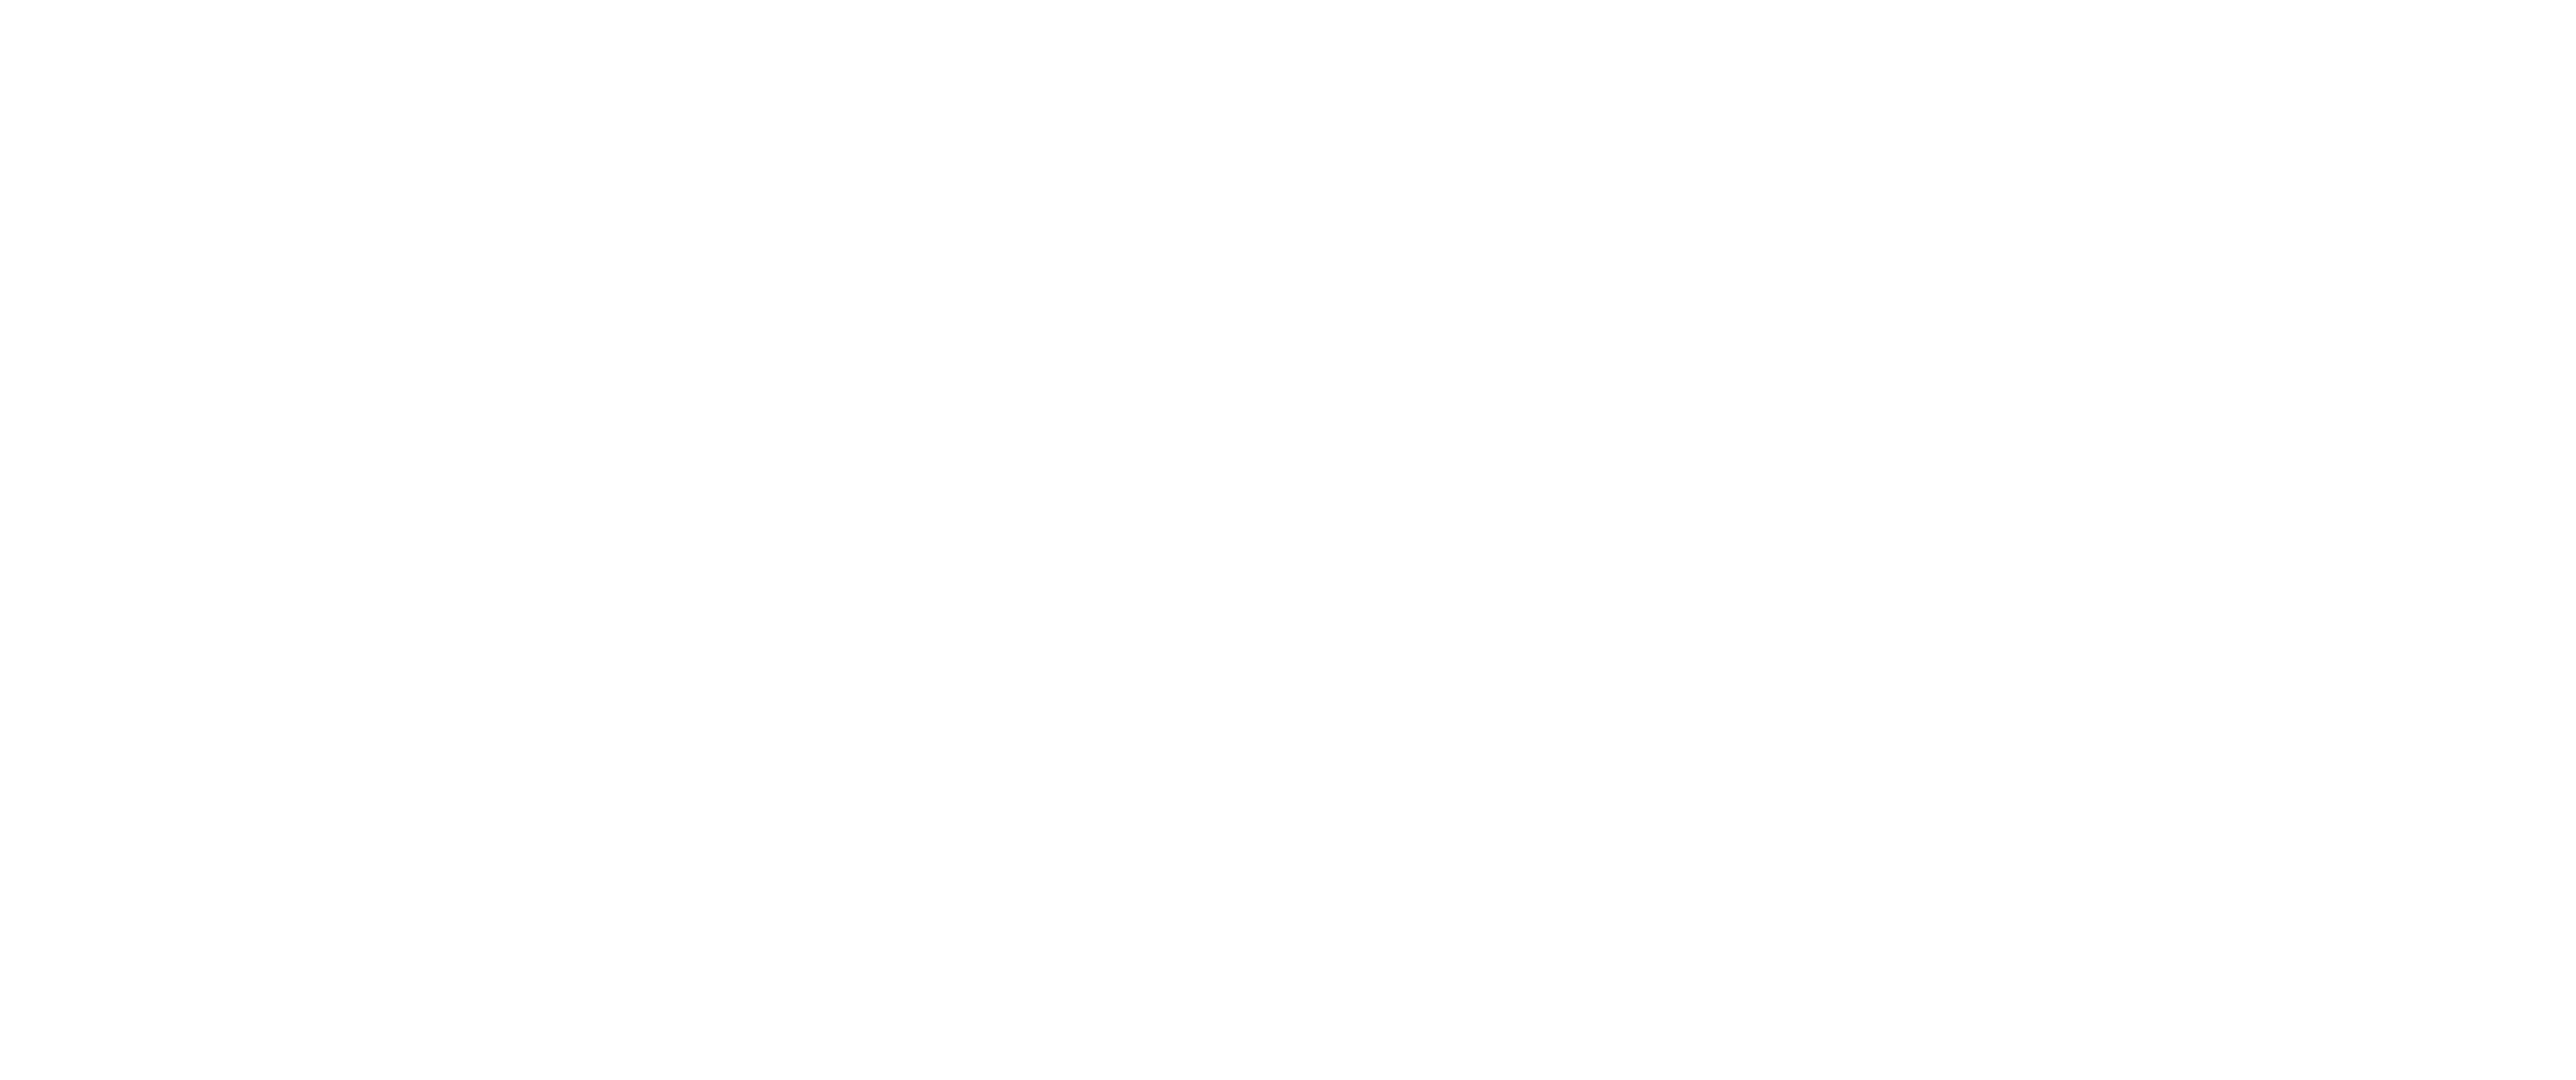 Material Driven